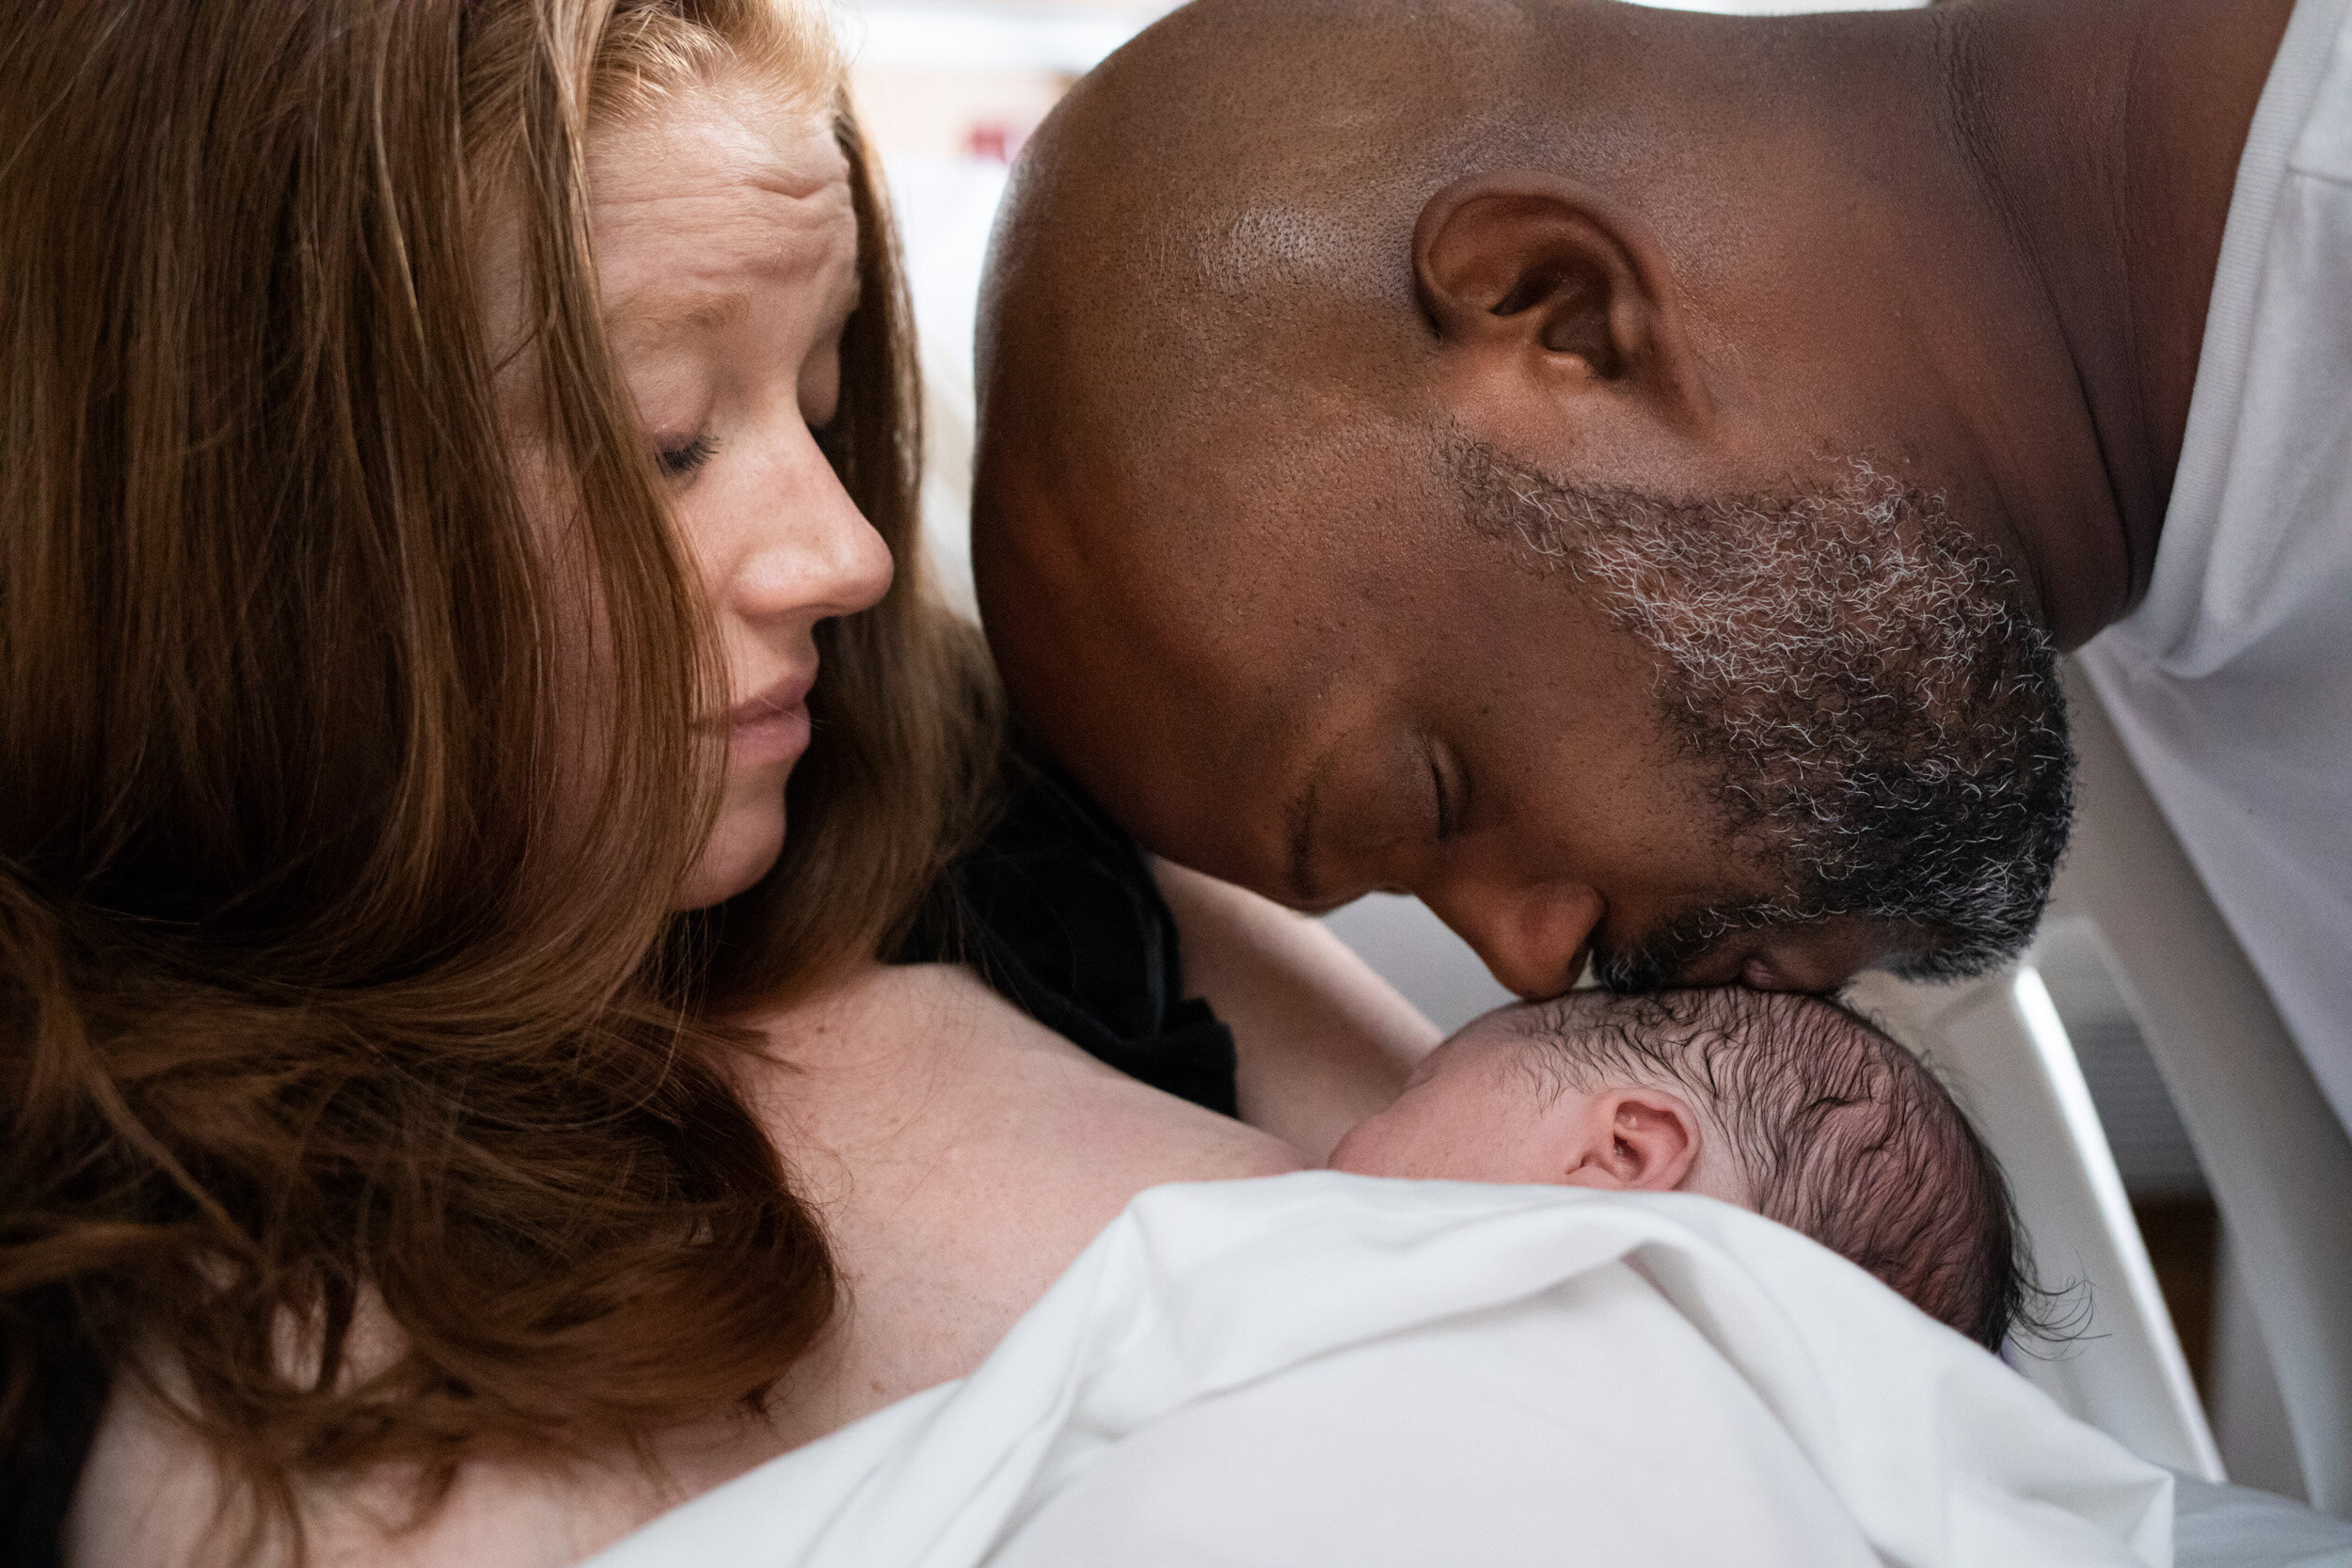 Jacksonville dad kissing his newborn baby boy just after birth